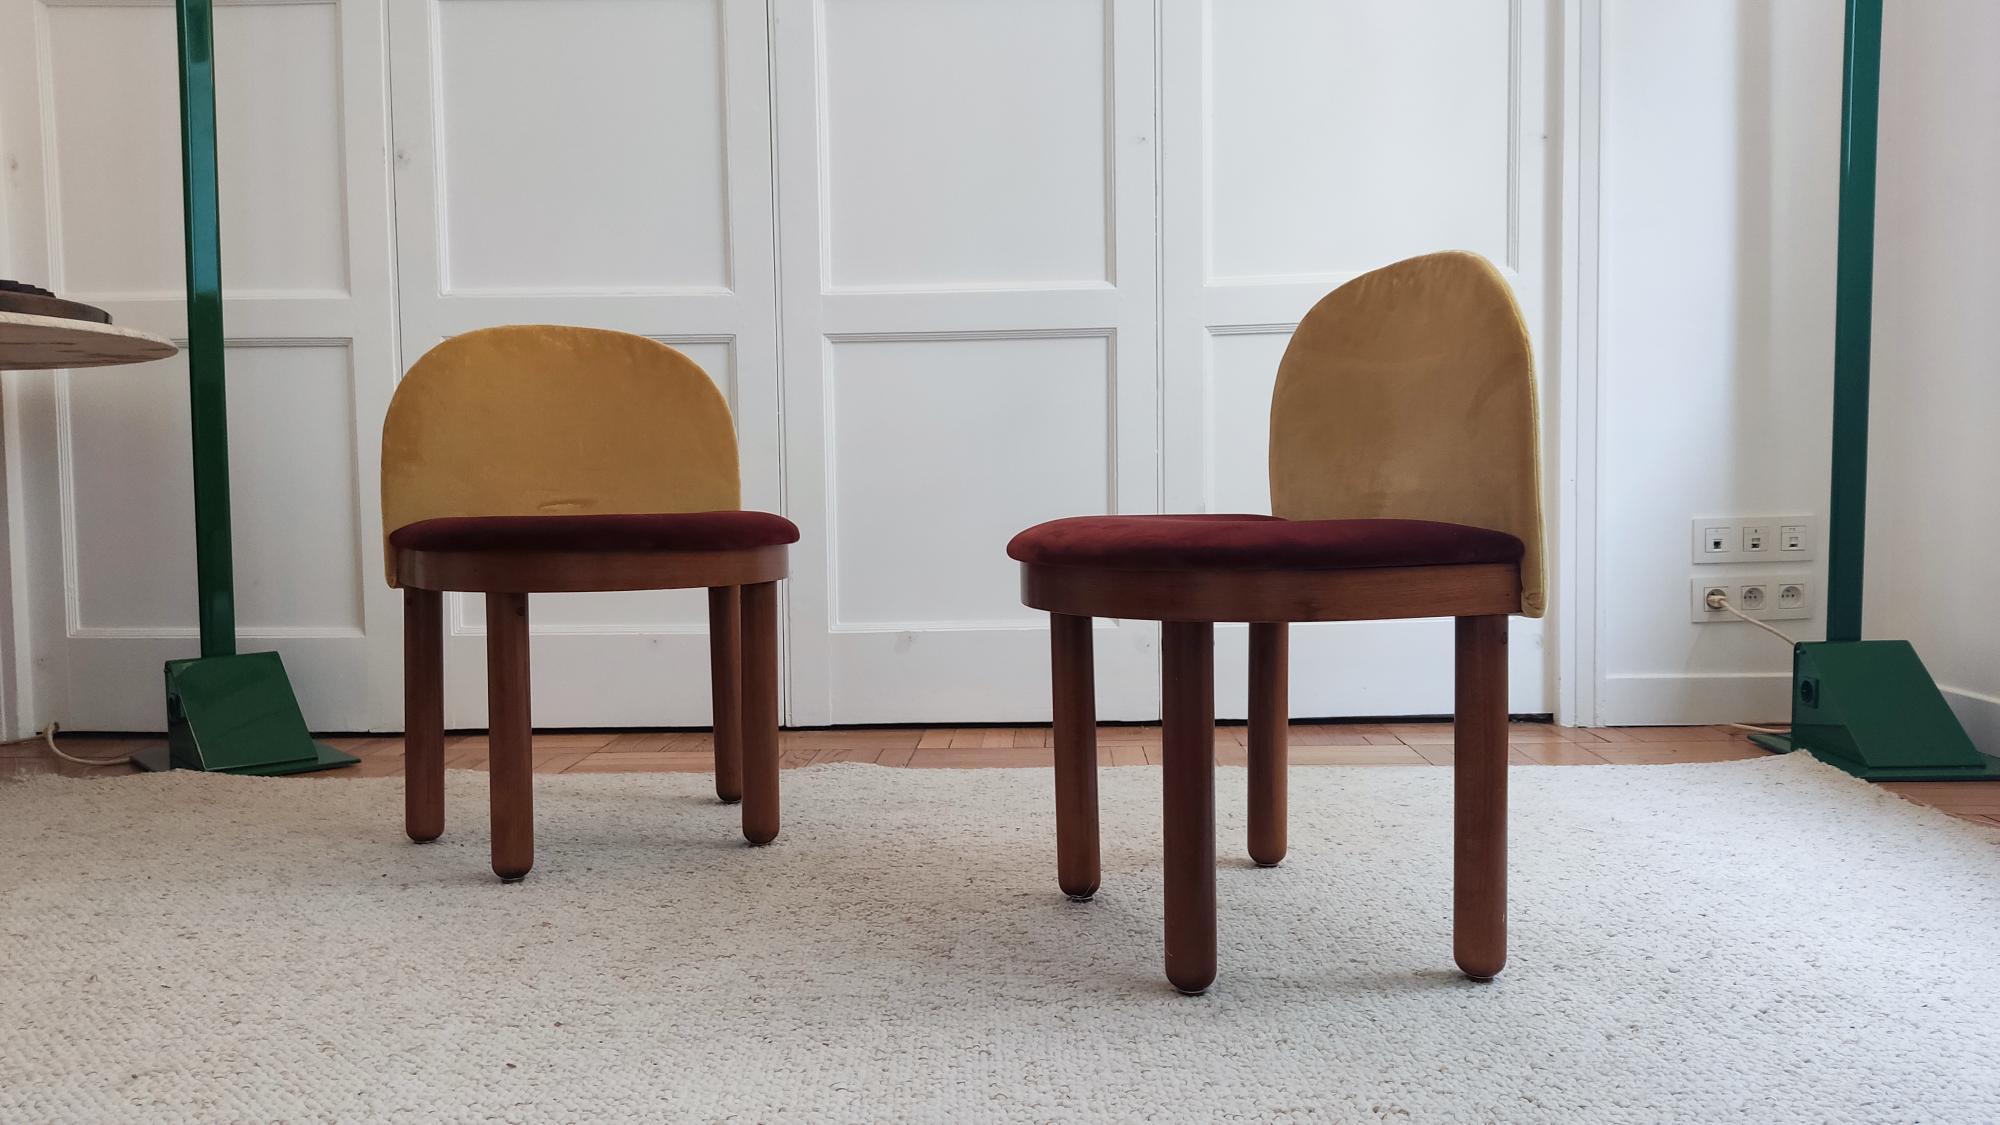 cute set of 4 small Italian chairs in wood and upholstered in warm yellow and red velvet. the round legs recall the tables of Gianfranco Frattini. Possibility of taking only one pair to place them around a coffee table.